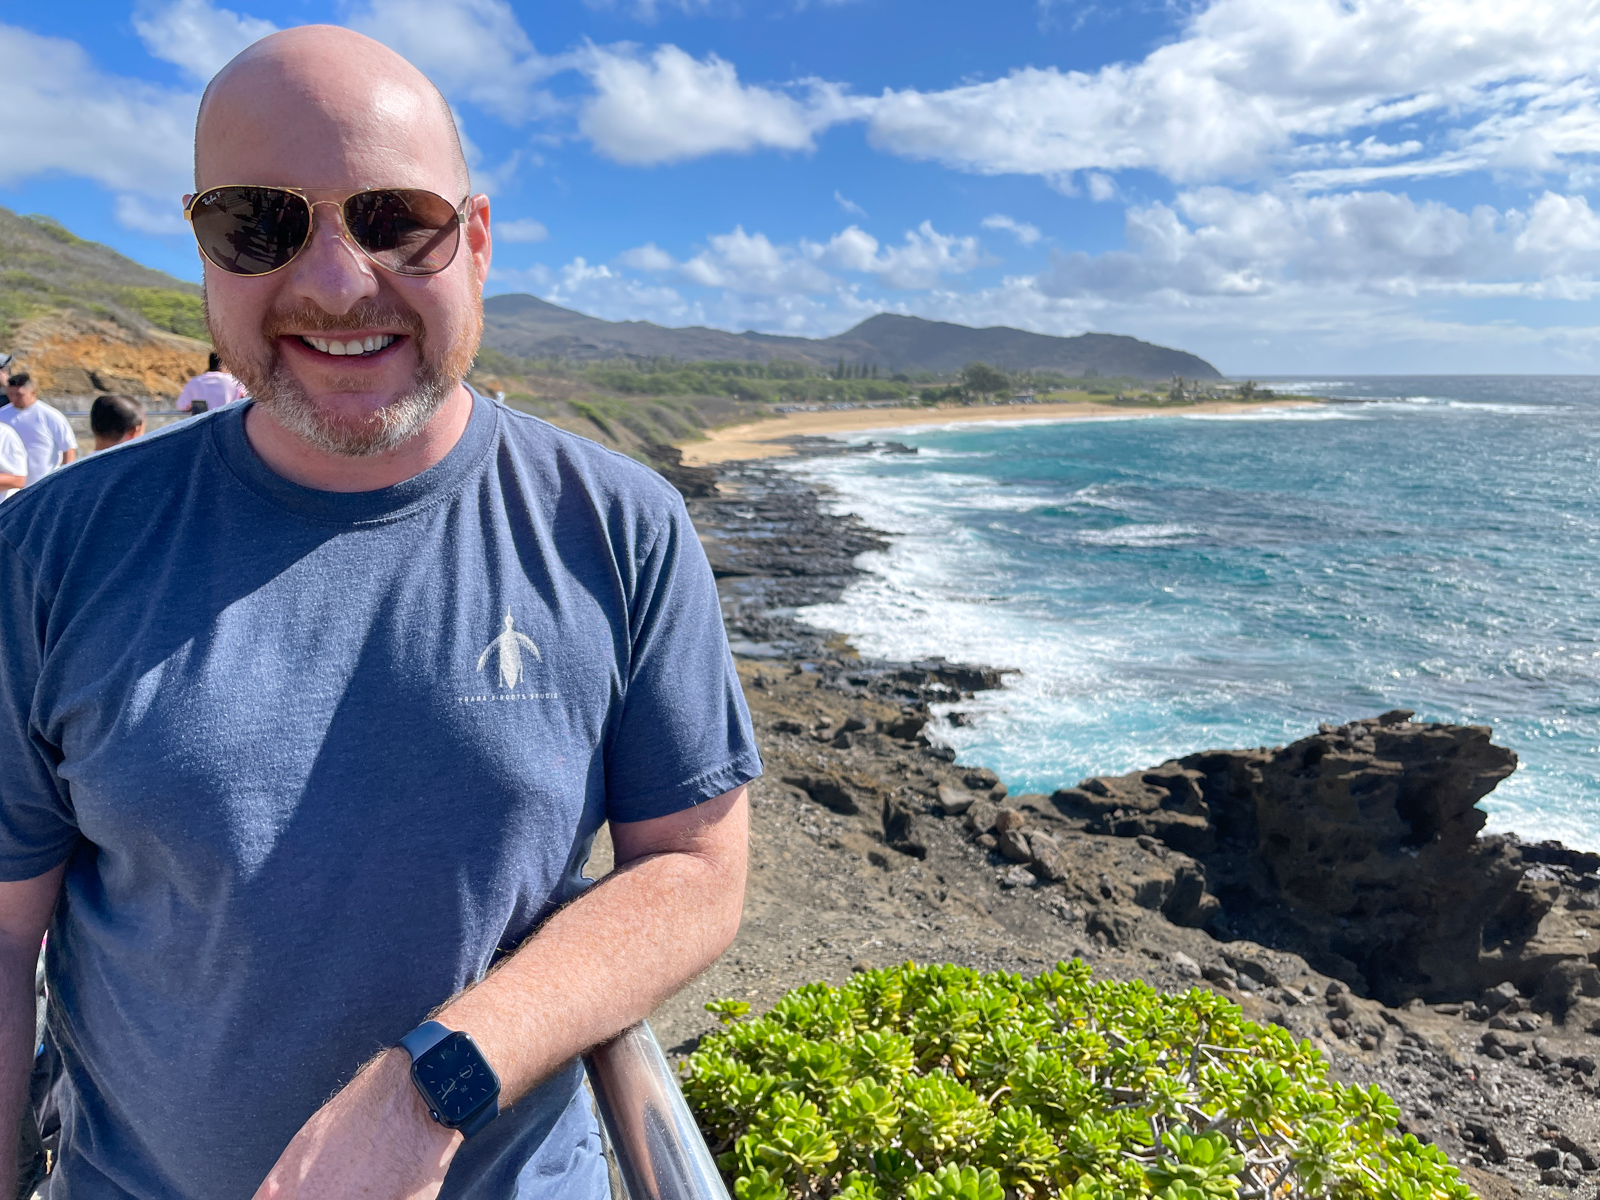 Dave on his one-day Oahu scenic drive in Hawaii